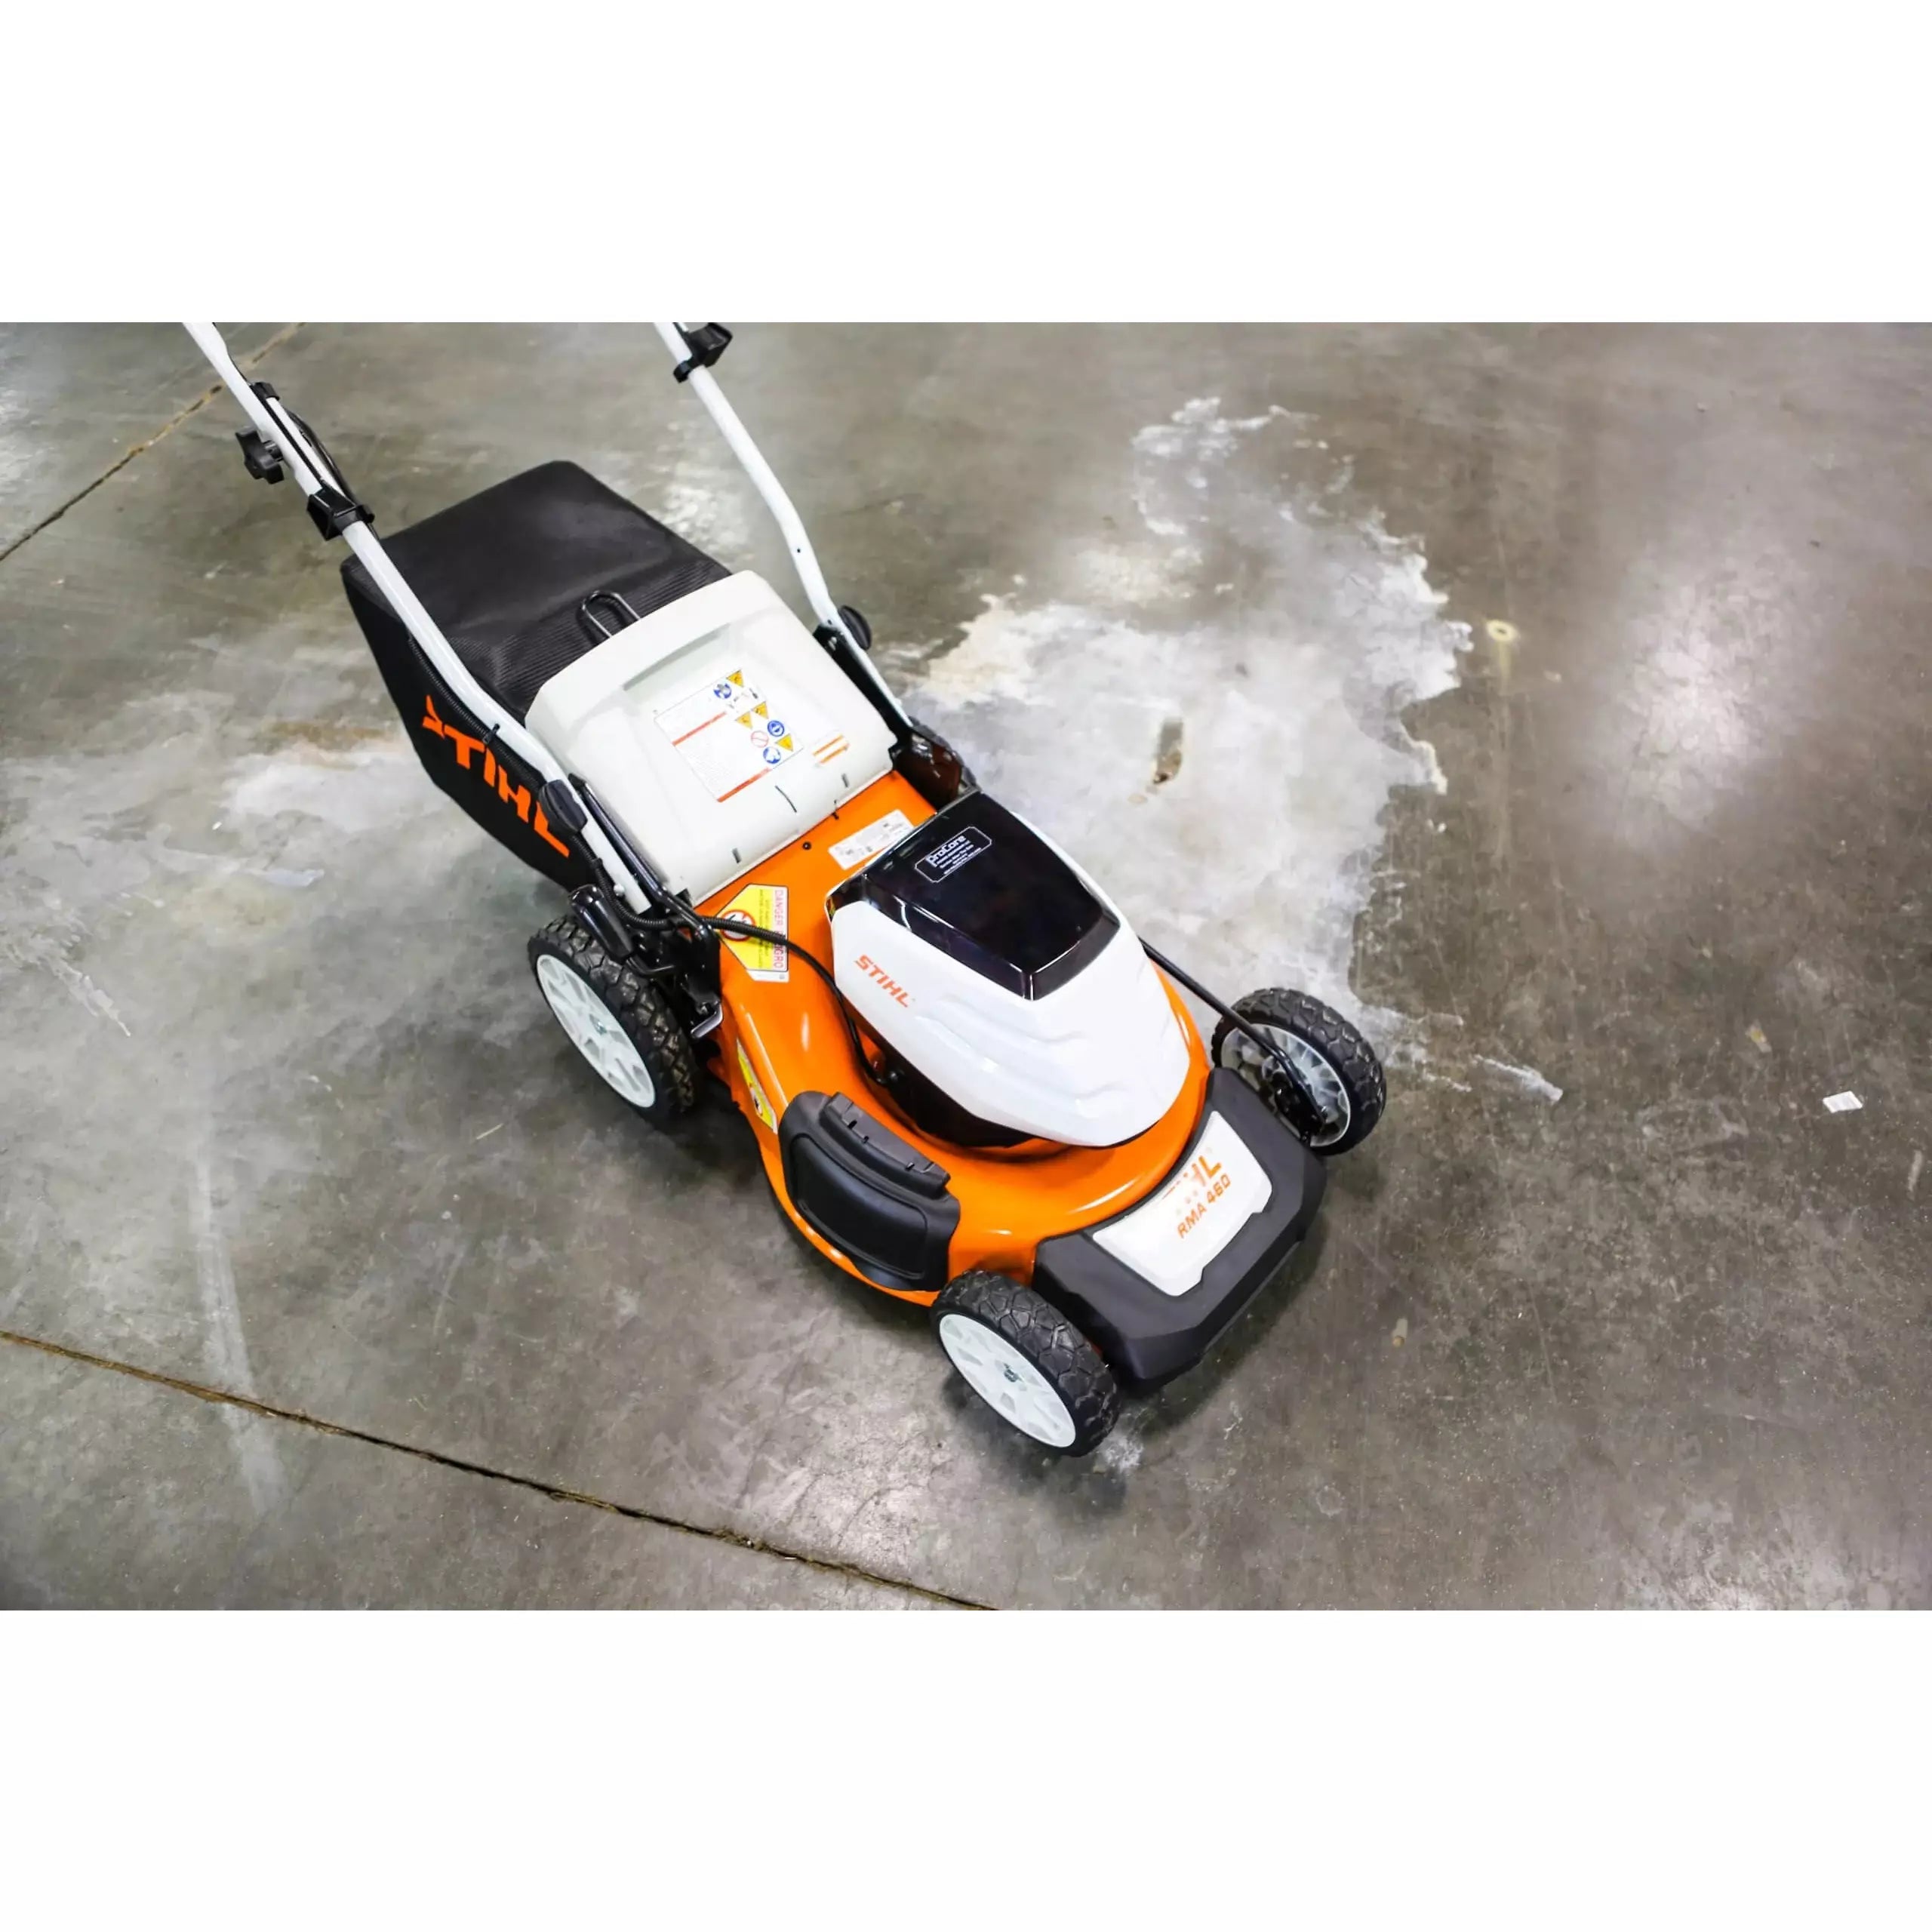 Stihl 36 Volt RMA 460K Battery Walk Mower With Battery and Charger